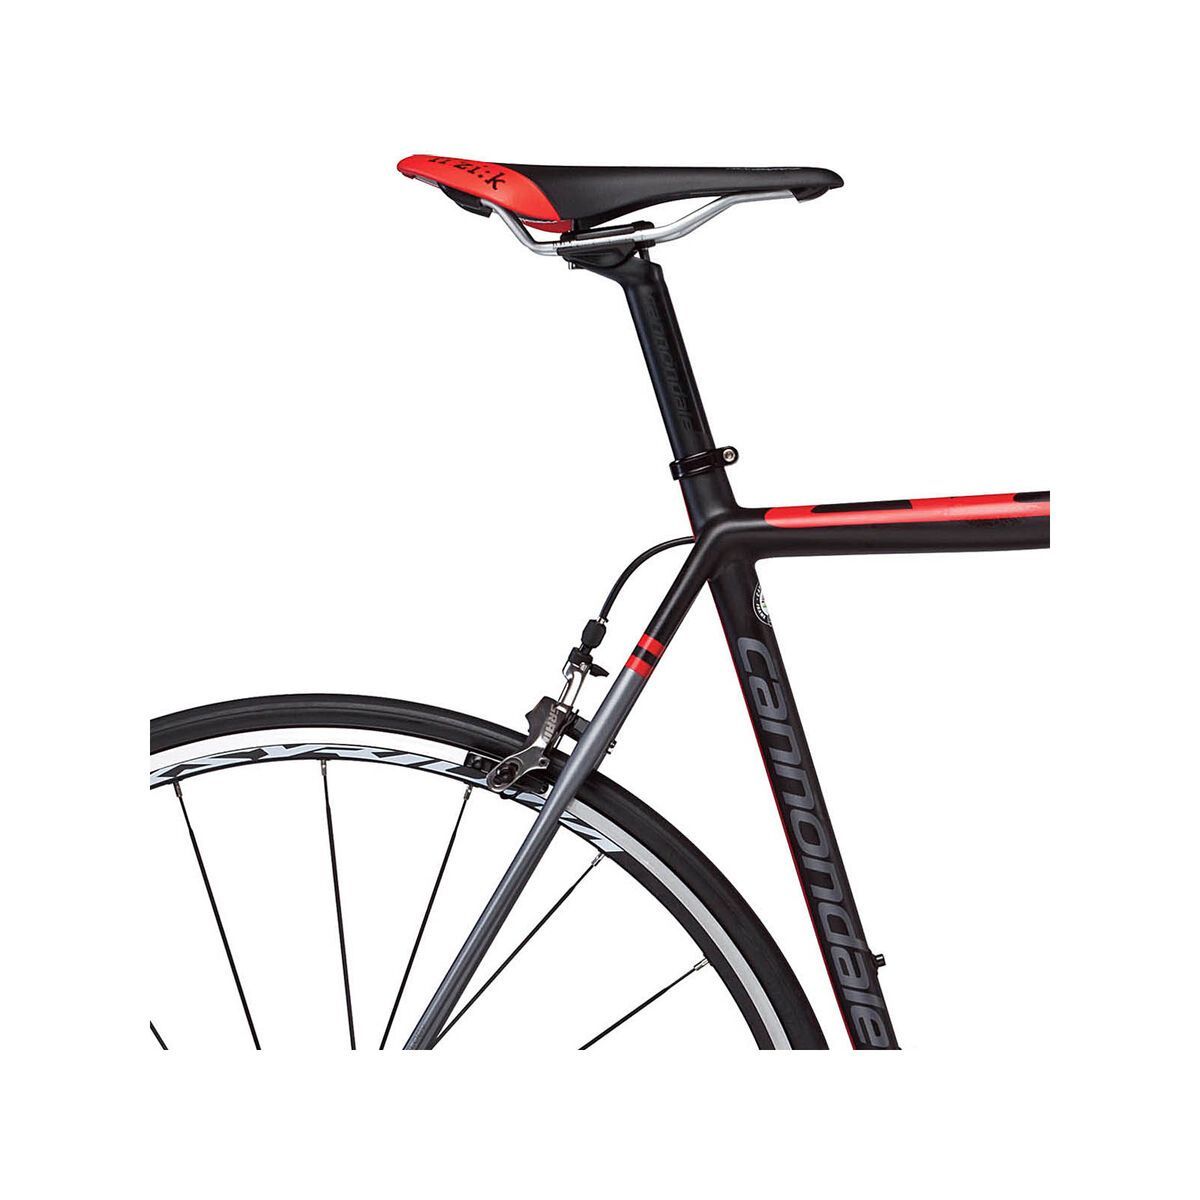 *** 2. Wahl *** Cannondale SuperSix Evo 2 Red 2013, exposed carbon w/ charcoal gray matte - Rennrad | Rahmenhöhe 58 cm | Bild 6